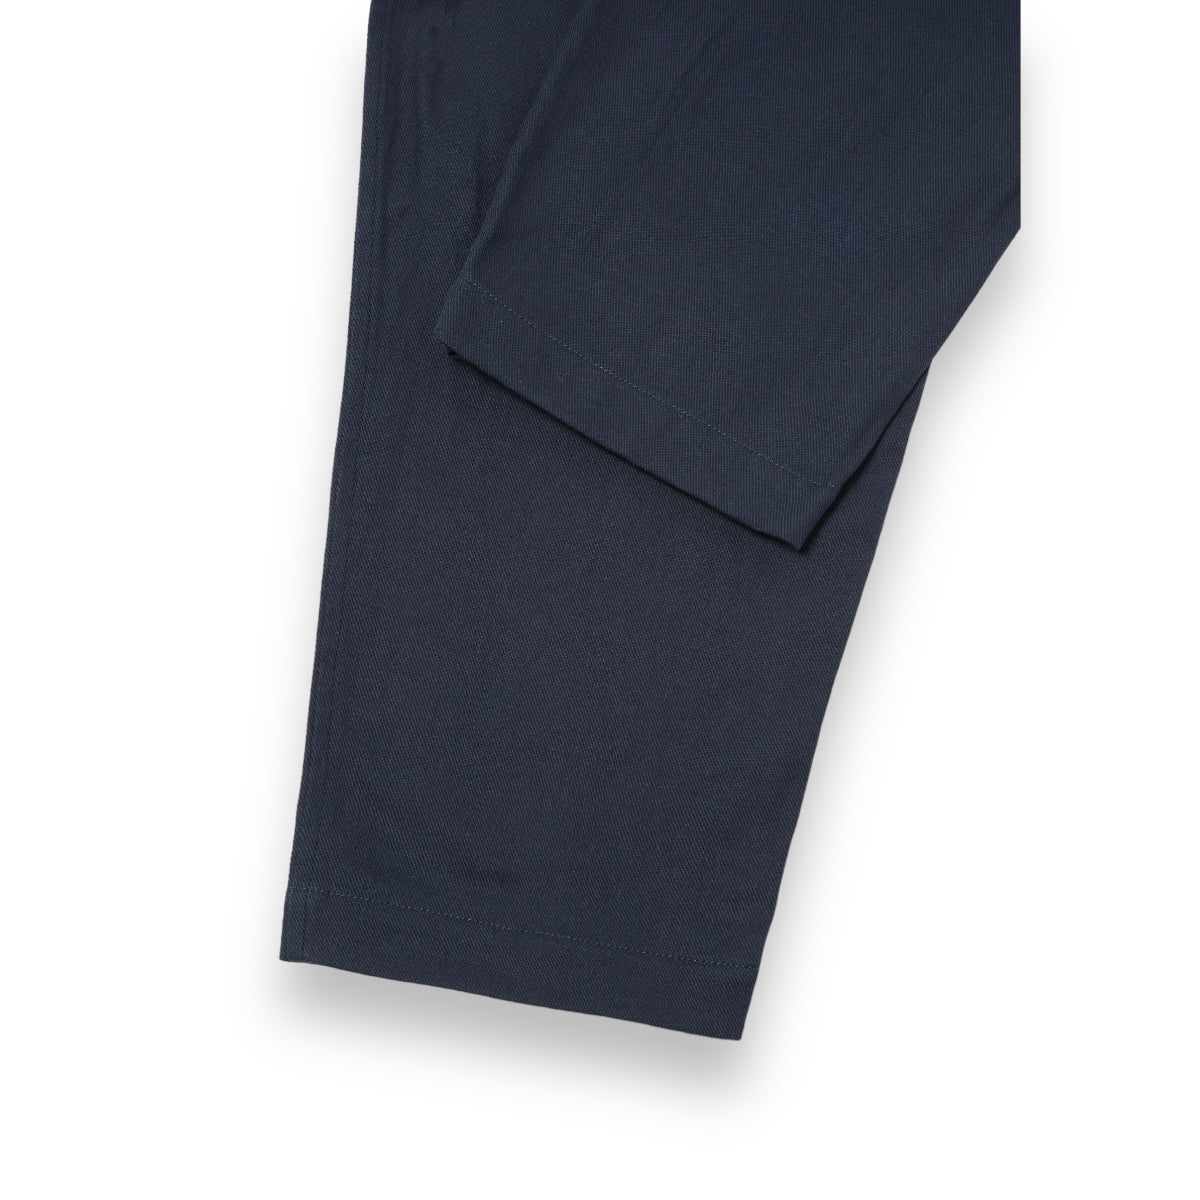 Universal Works Pleated Track Pant 29181 Winter Twill navy